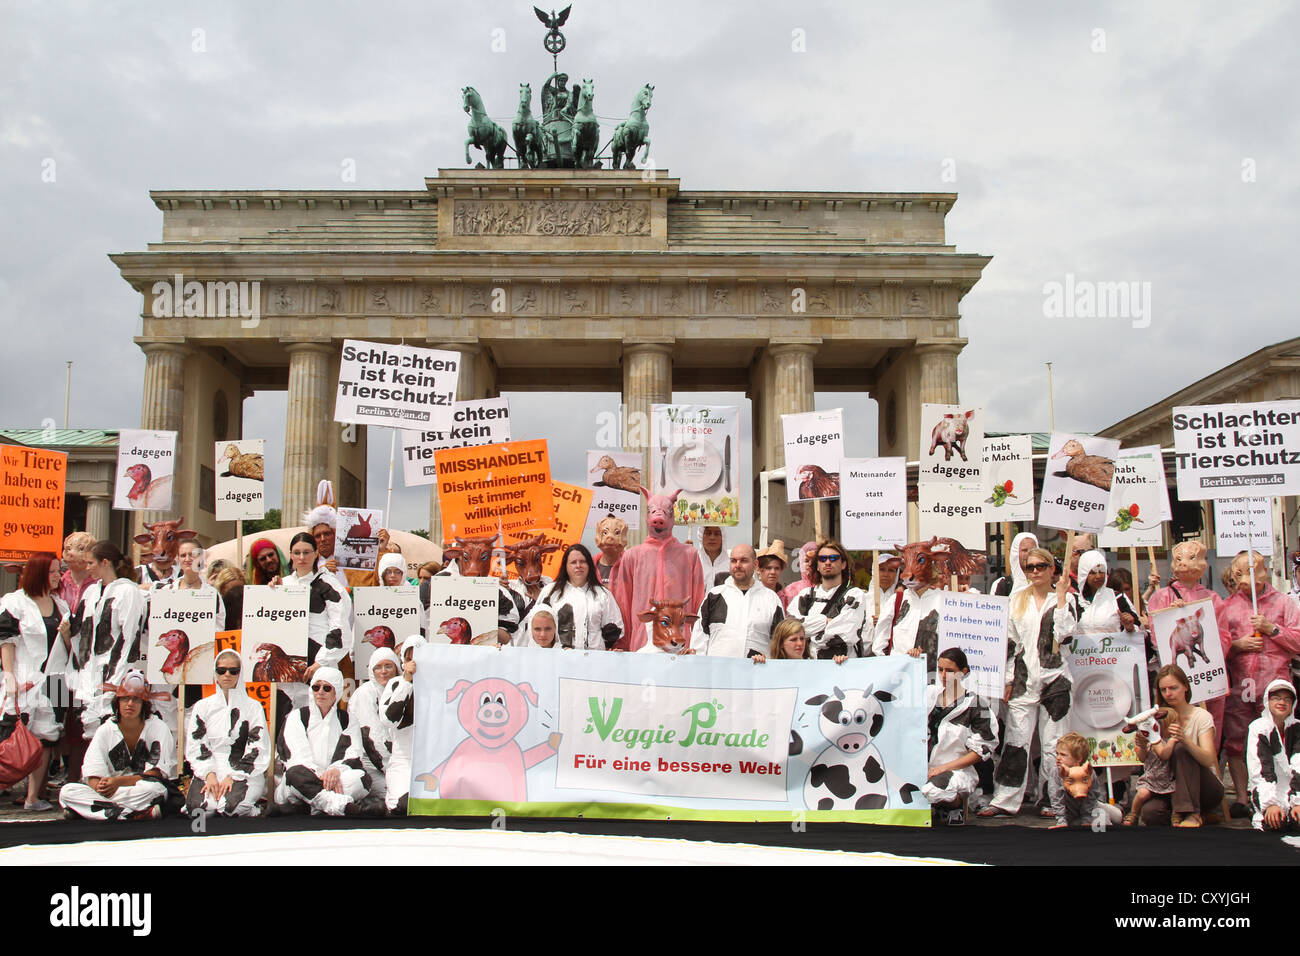 Veggie parade, vegans and vegetarians protesting under the slogan eat peace for a diet without animal exploitation Stock Photo